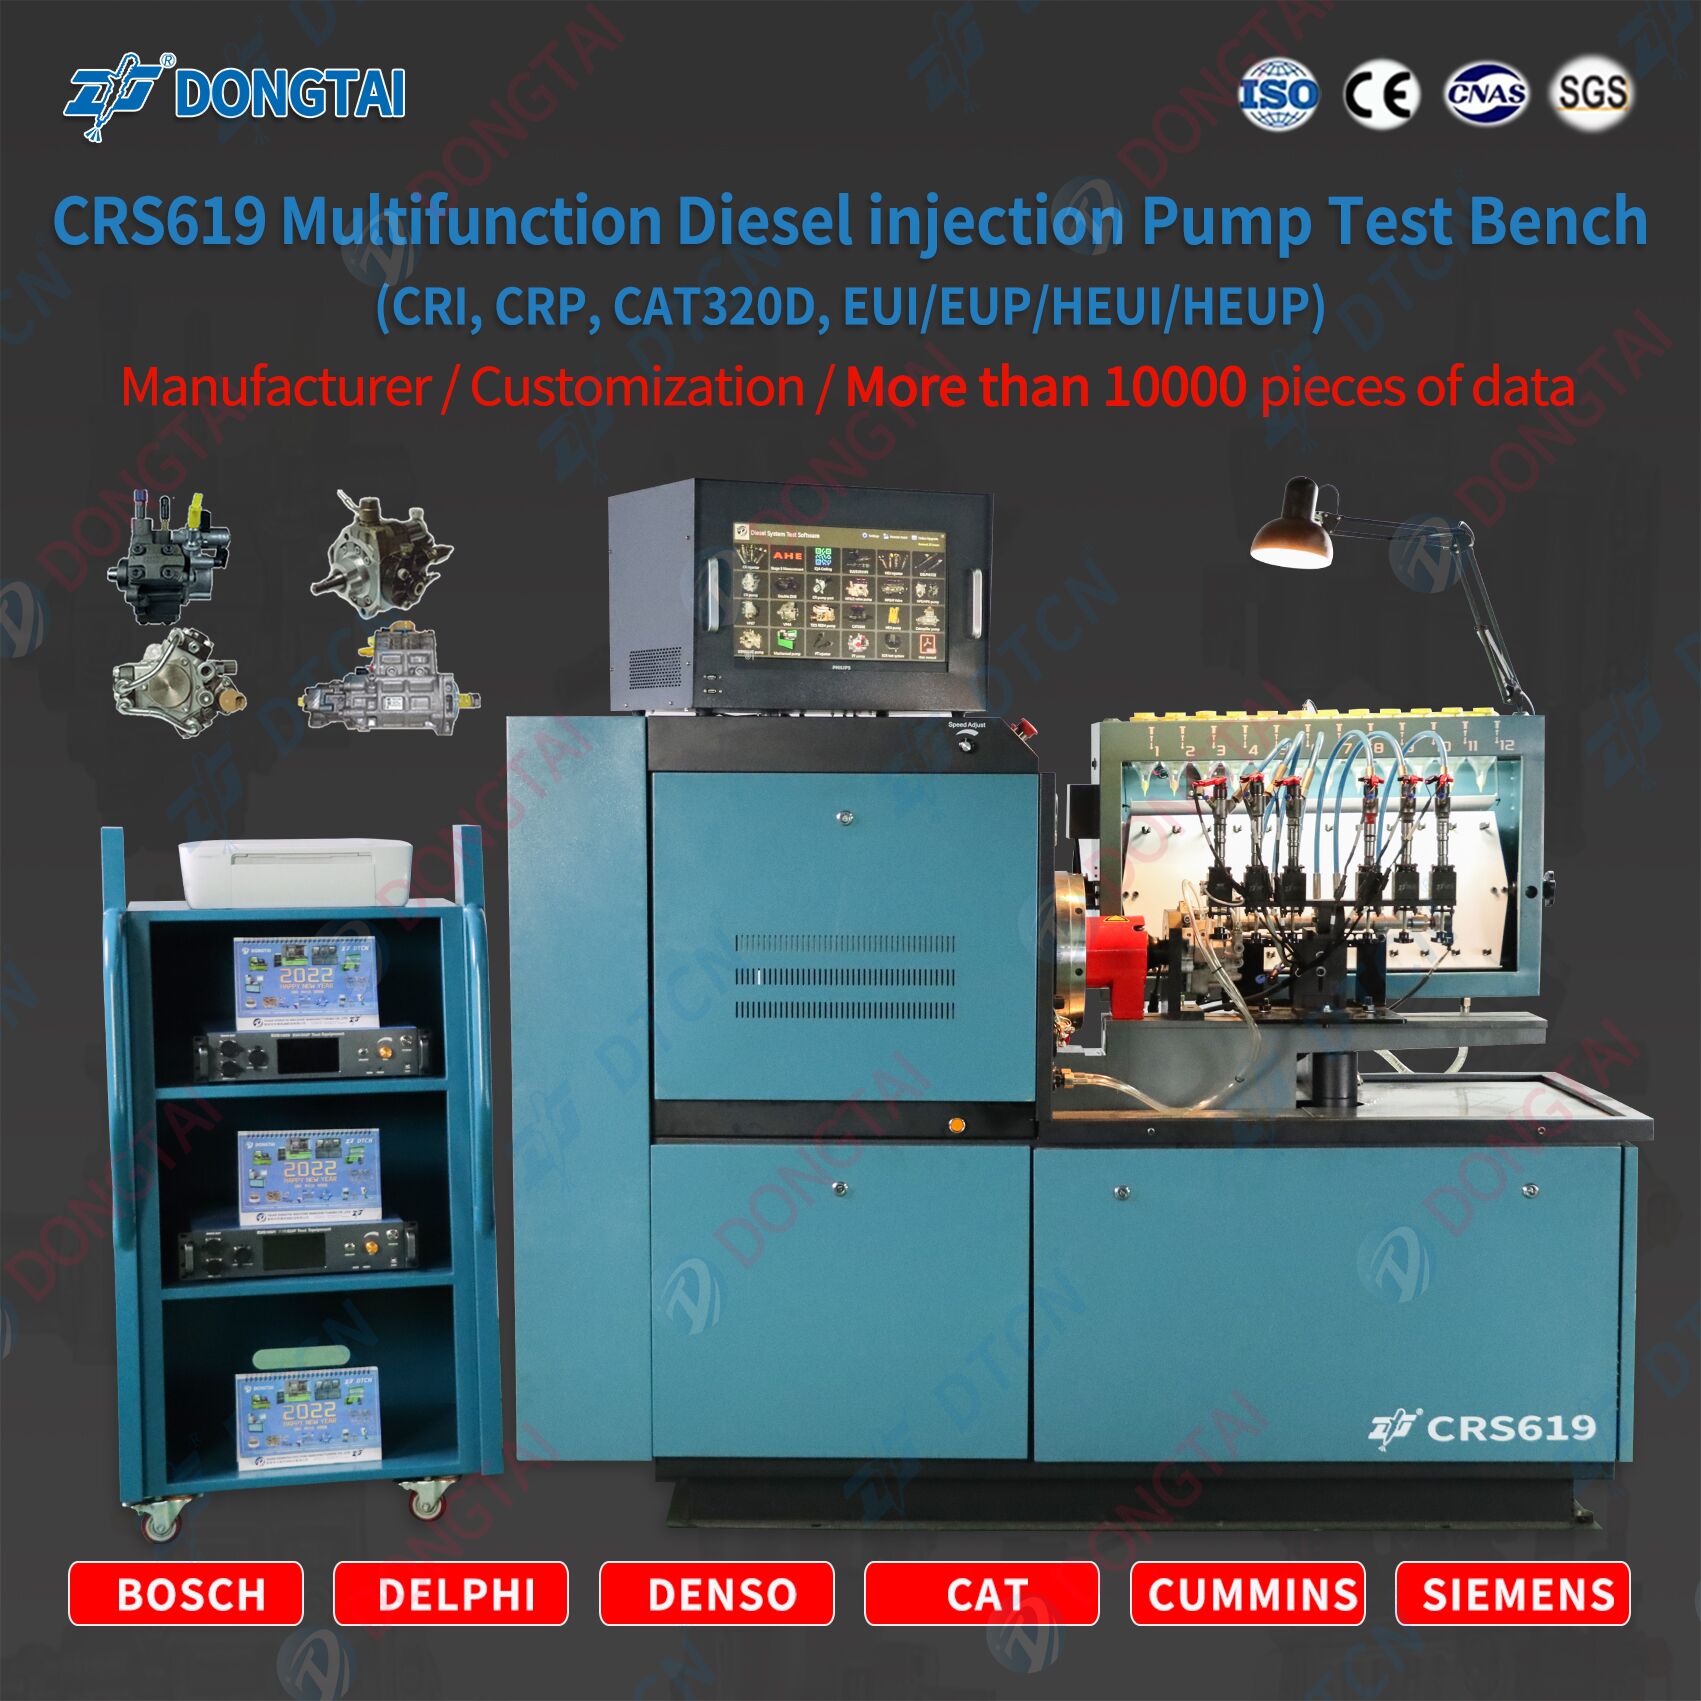 CRS619 multifunction diesel injection pump test bench